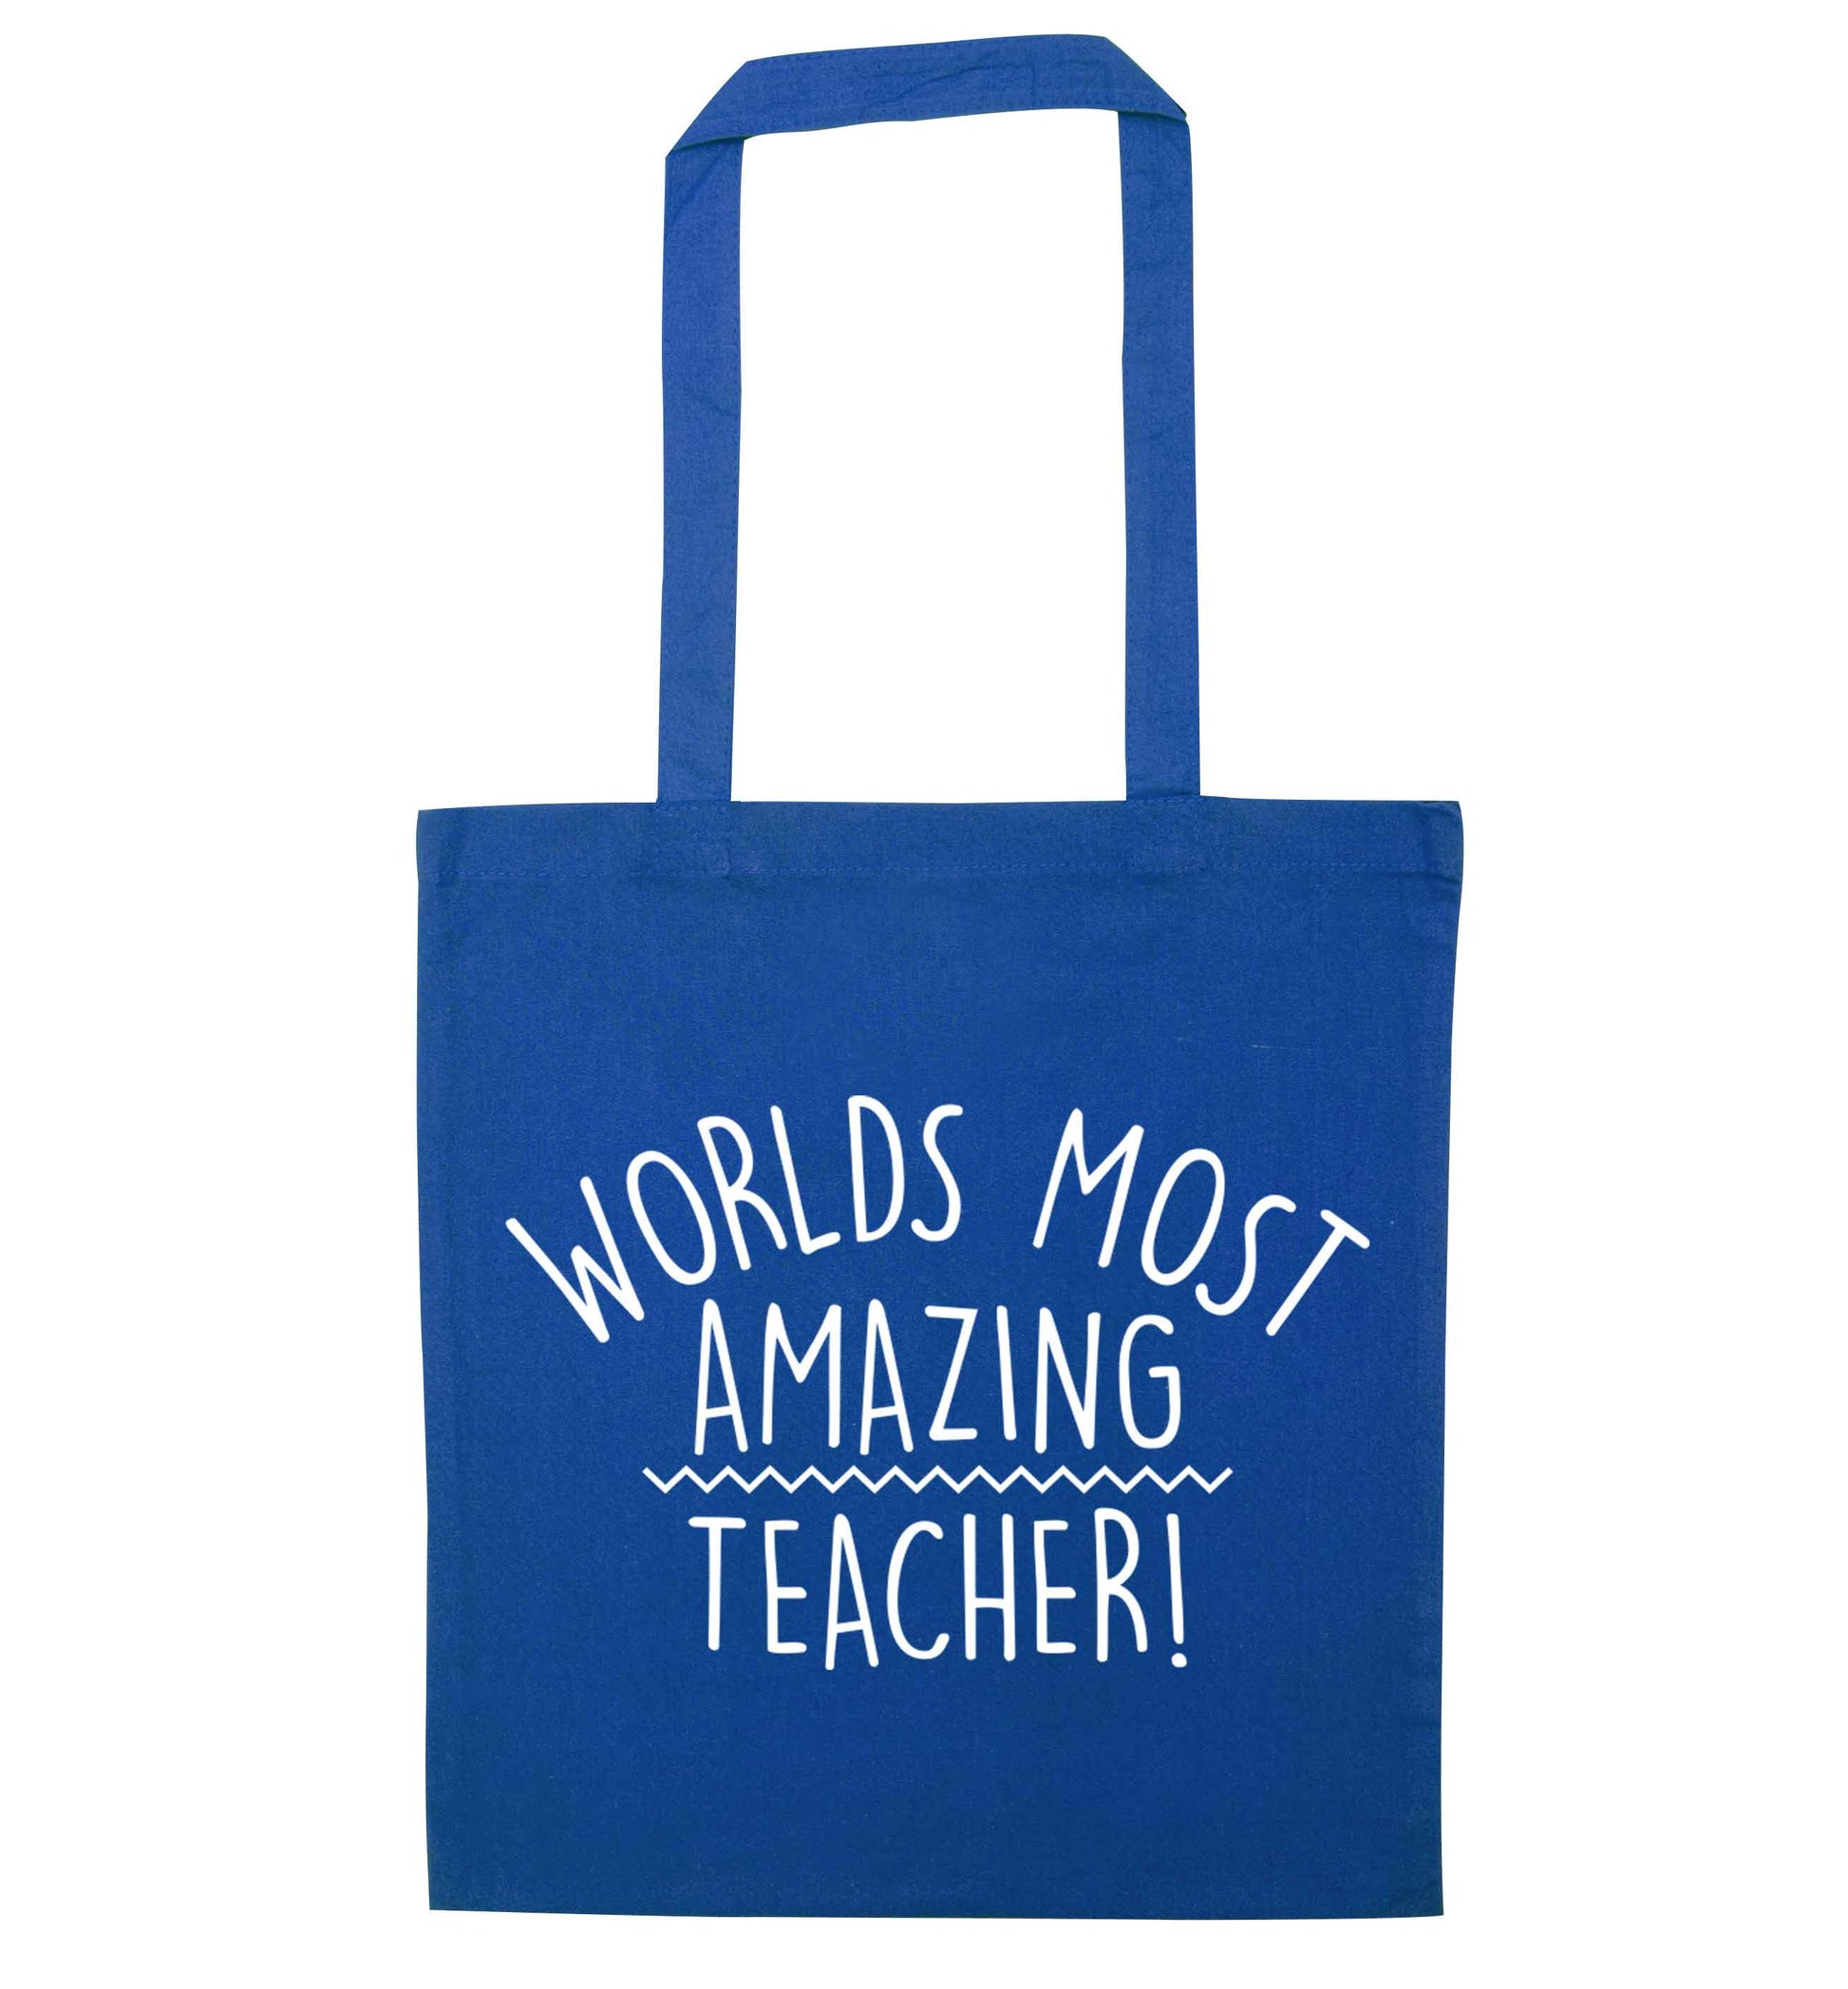 Worlds most amazing teacher blue tote bag